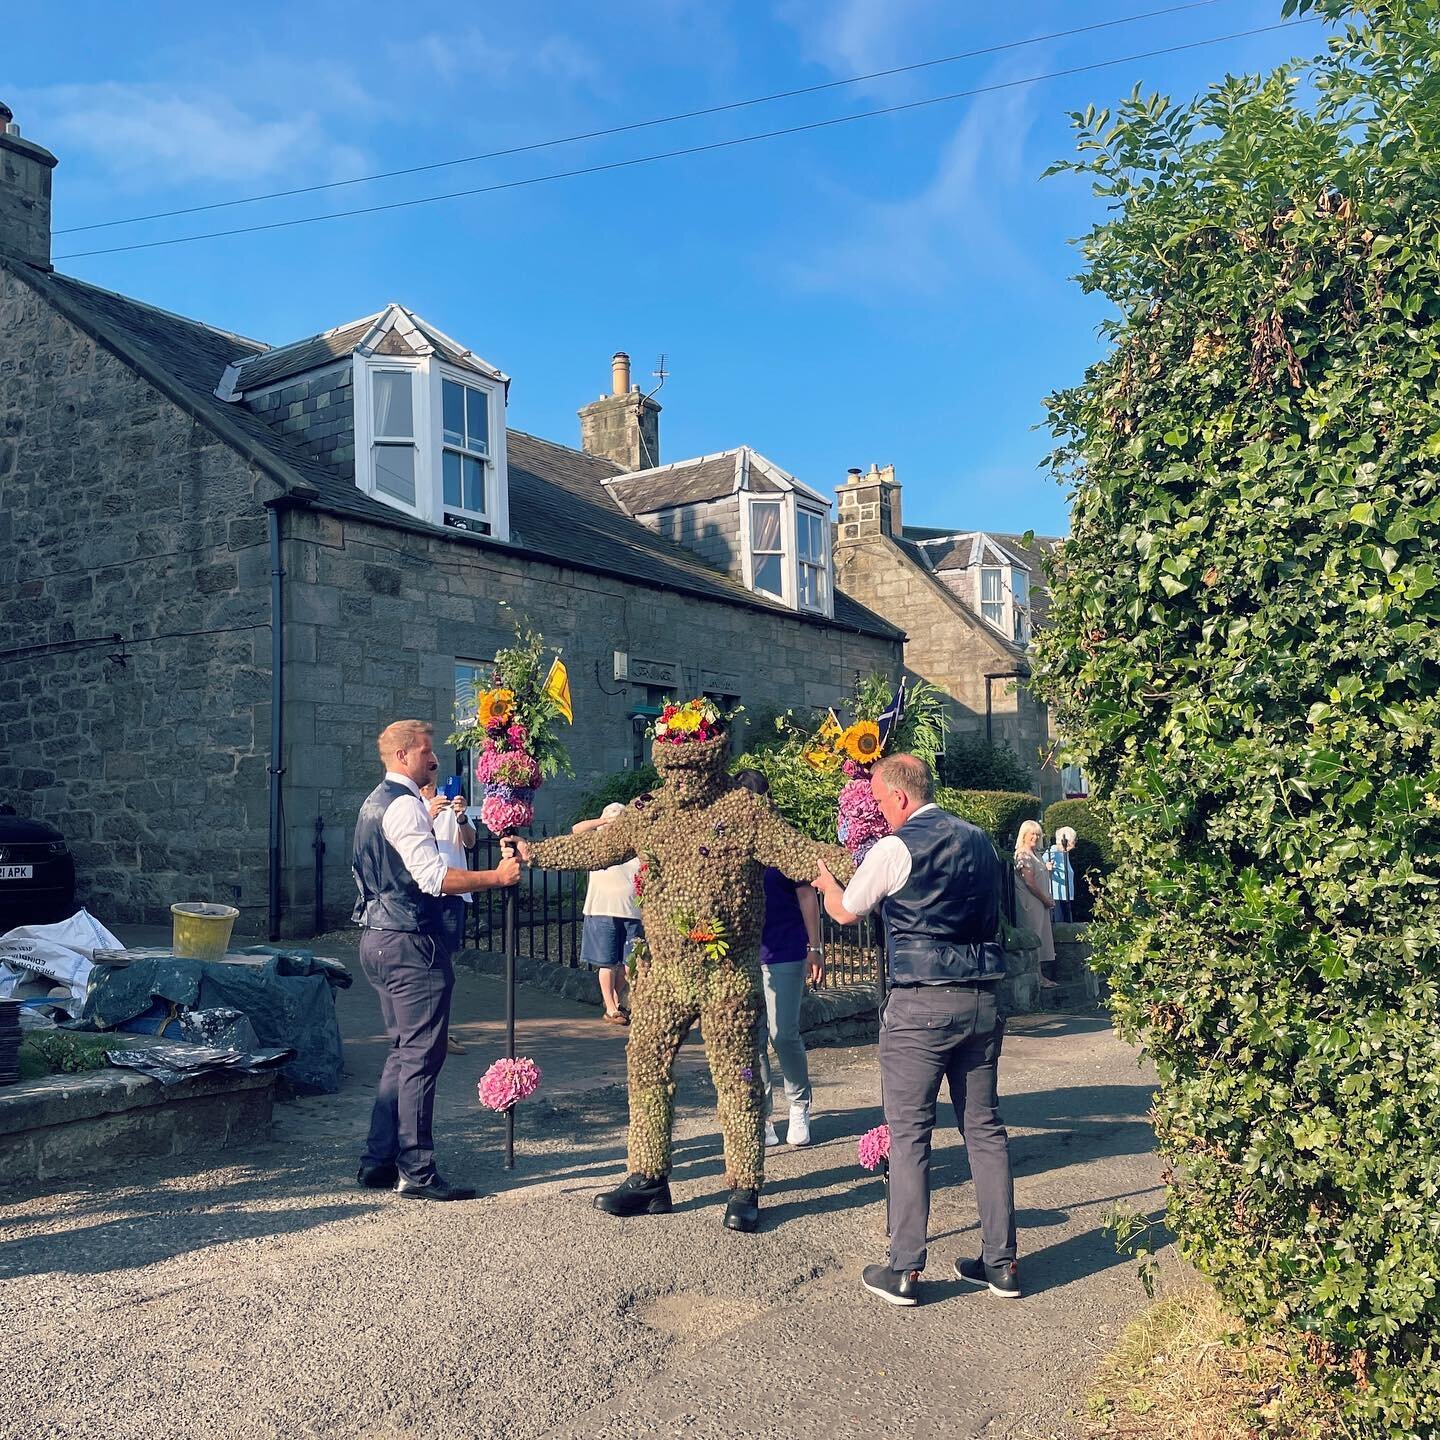 Had such a fun Friday morning last week as we headed over to catch the annual Burry Man festival in the gorgeous Scottish town of South Queensferry. 

I first heard about the festival when I saw a painting and then a music video about it by @ben_edge